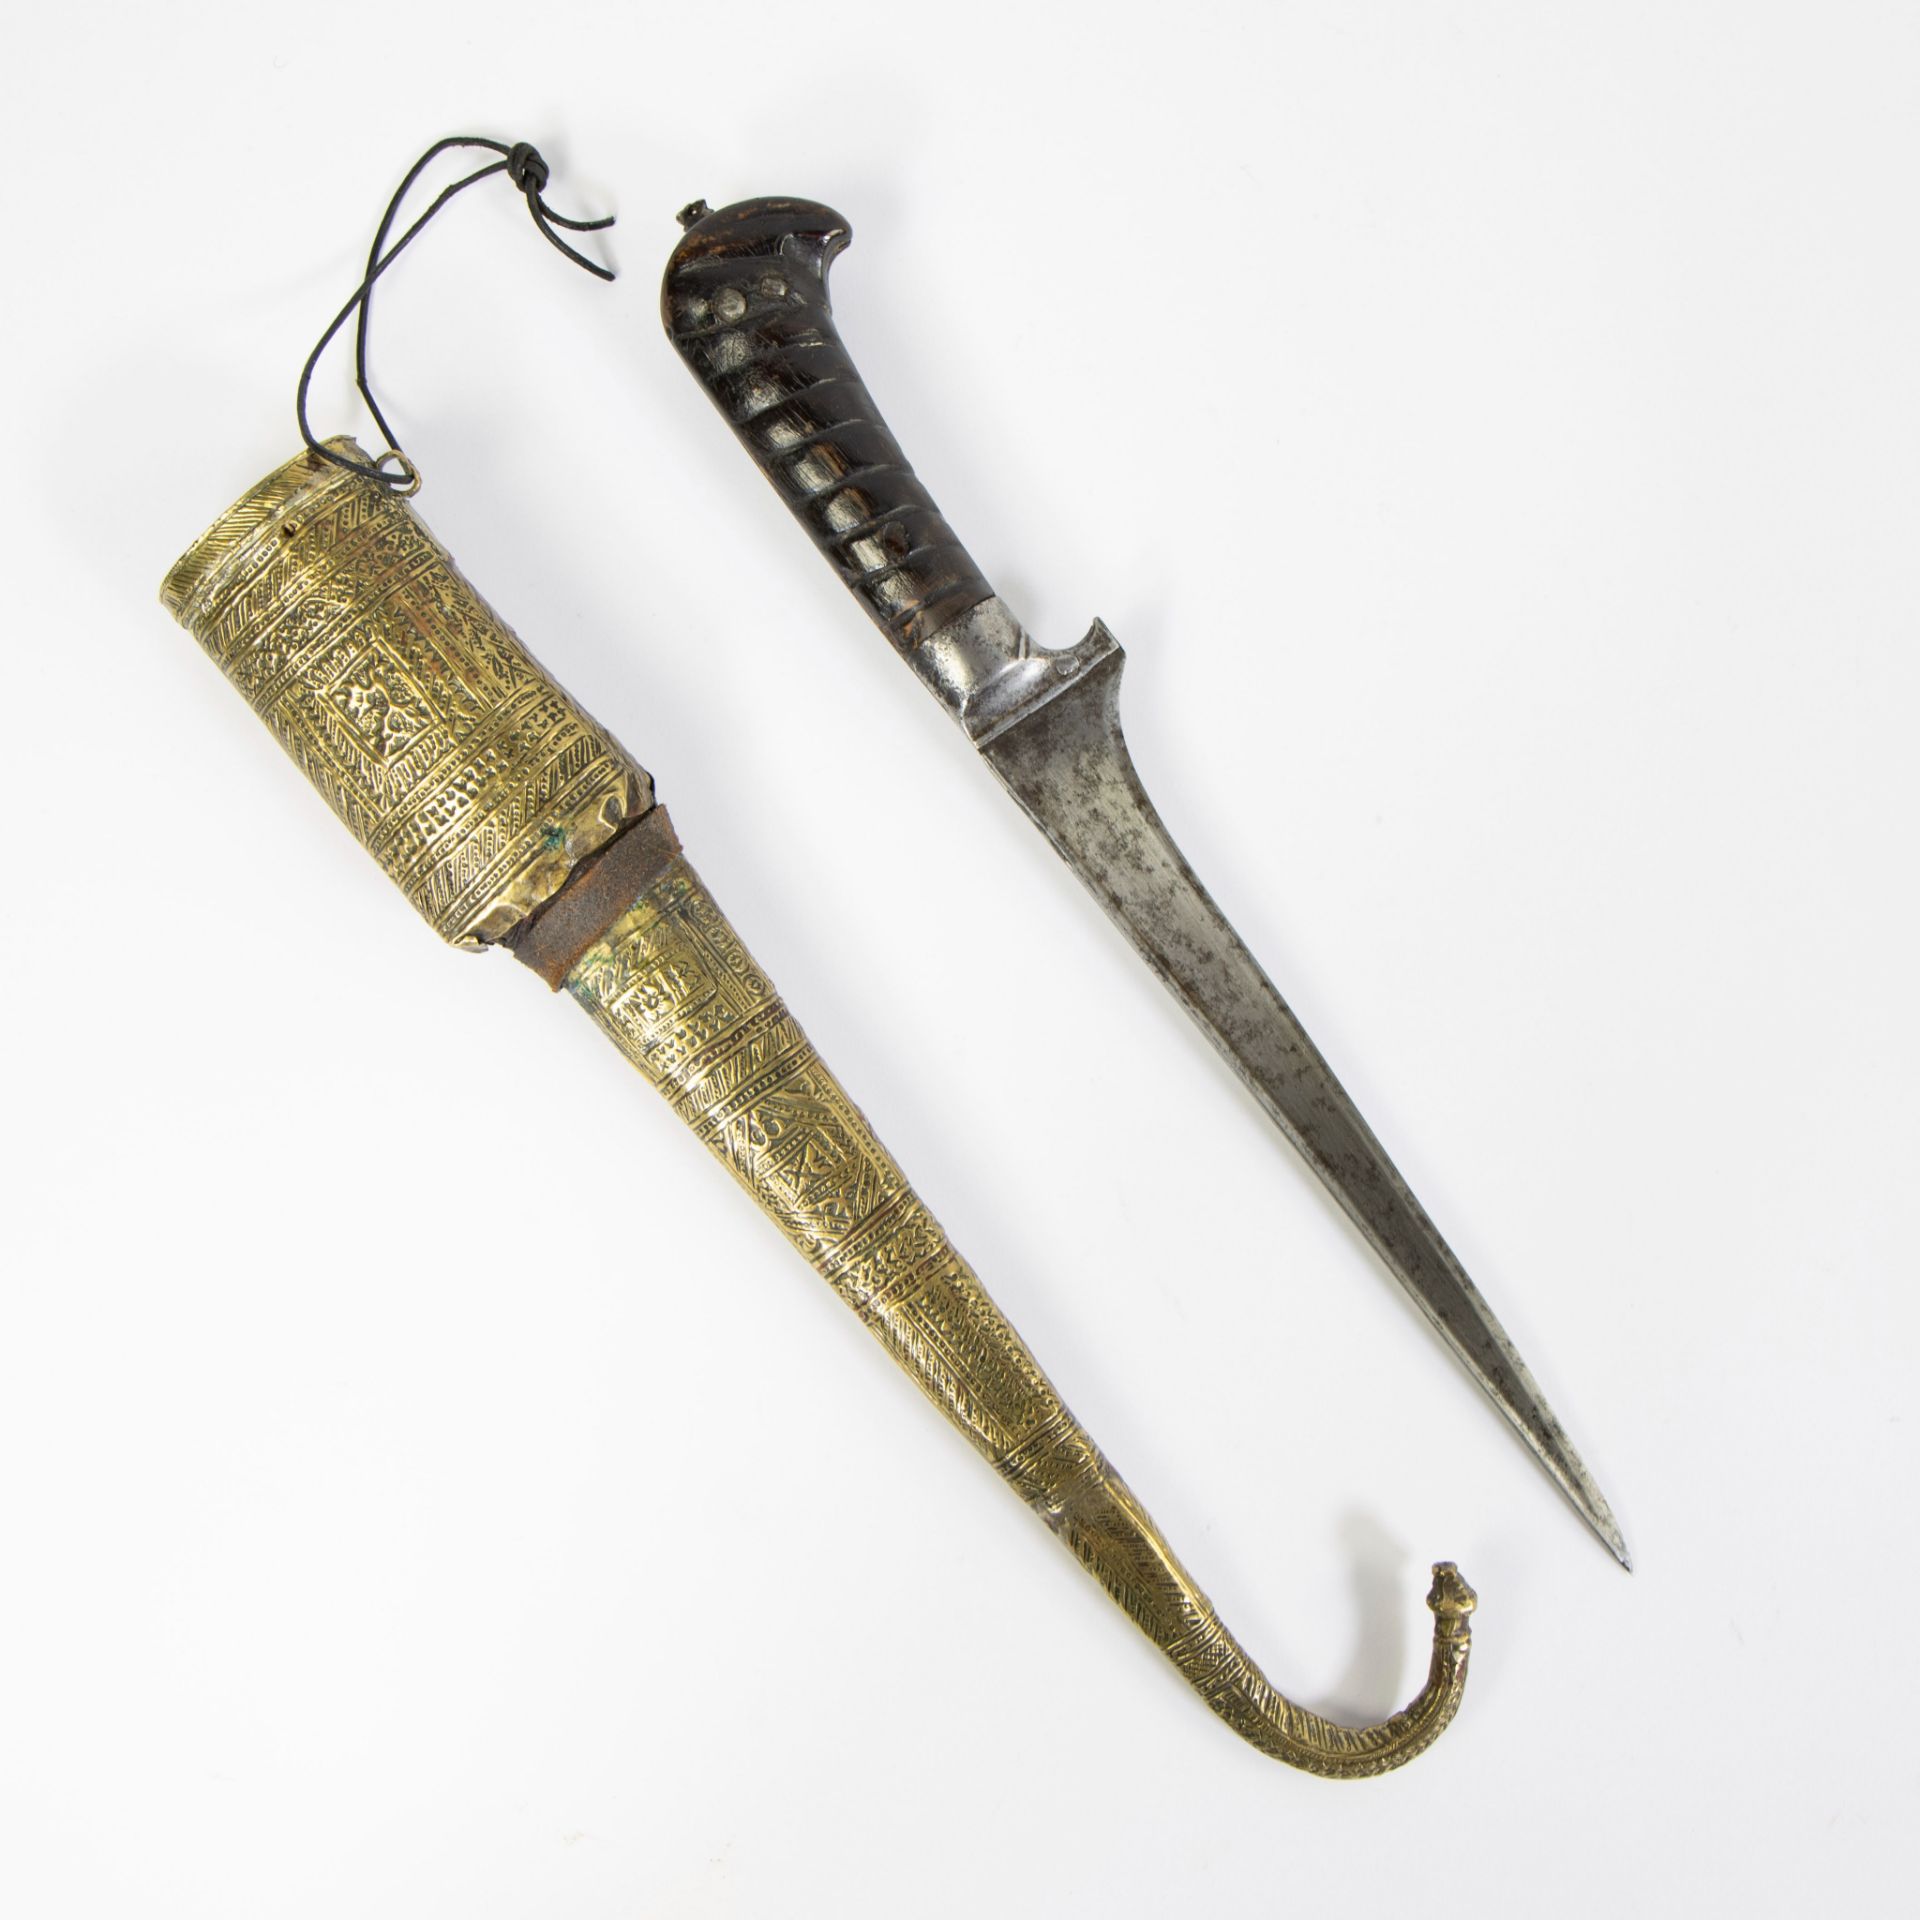 Choora dagger of the Mahsud tribe ca 1900, hilt in horn, Afganistan - Image 2 of 2